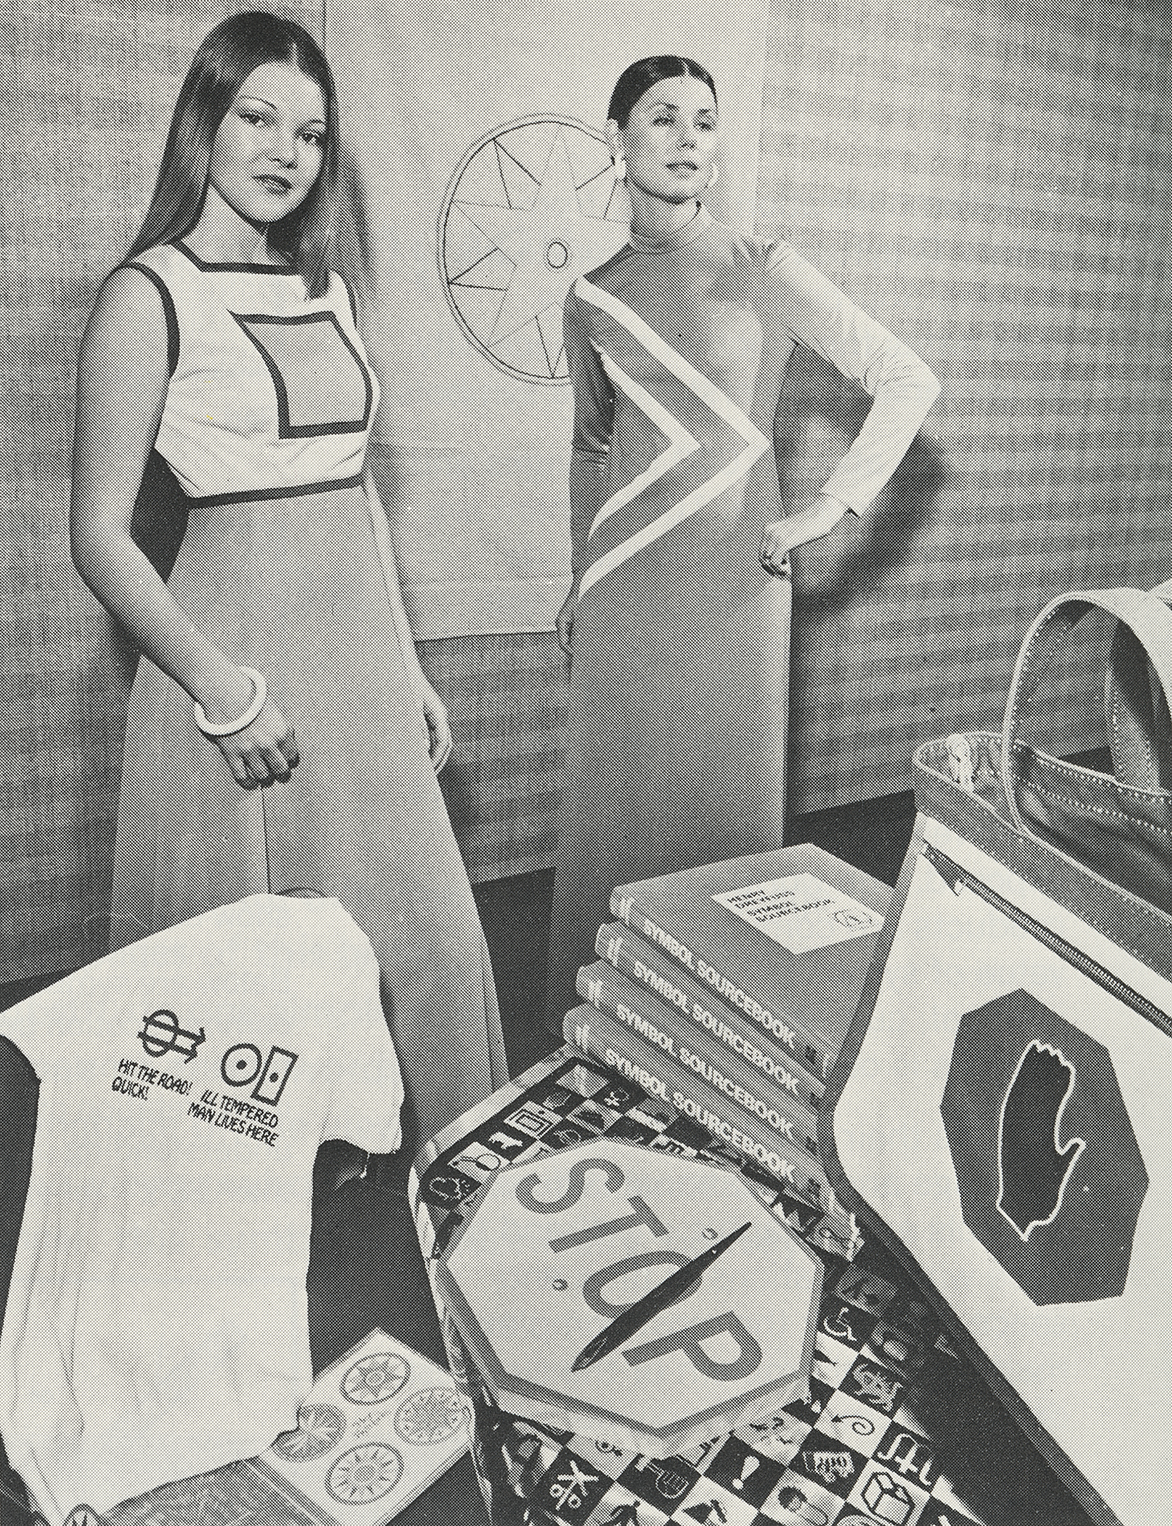 Black-and-white photograph of two women modeling long dresses with graphic detailing. In front of them is a table of merchandise related to graphic symbols.